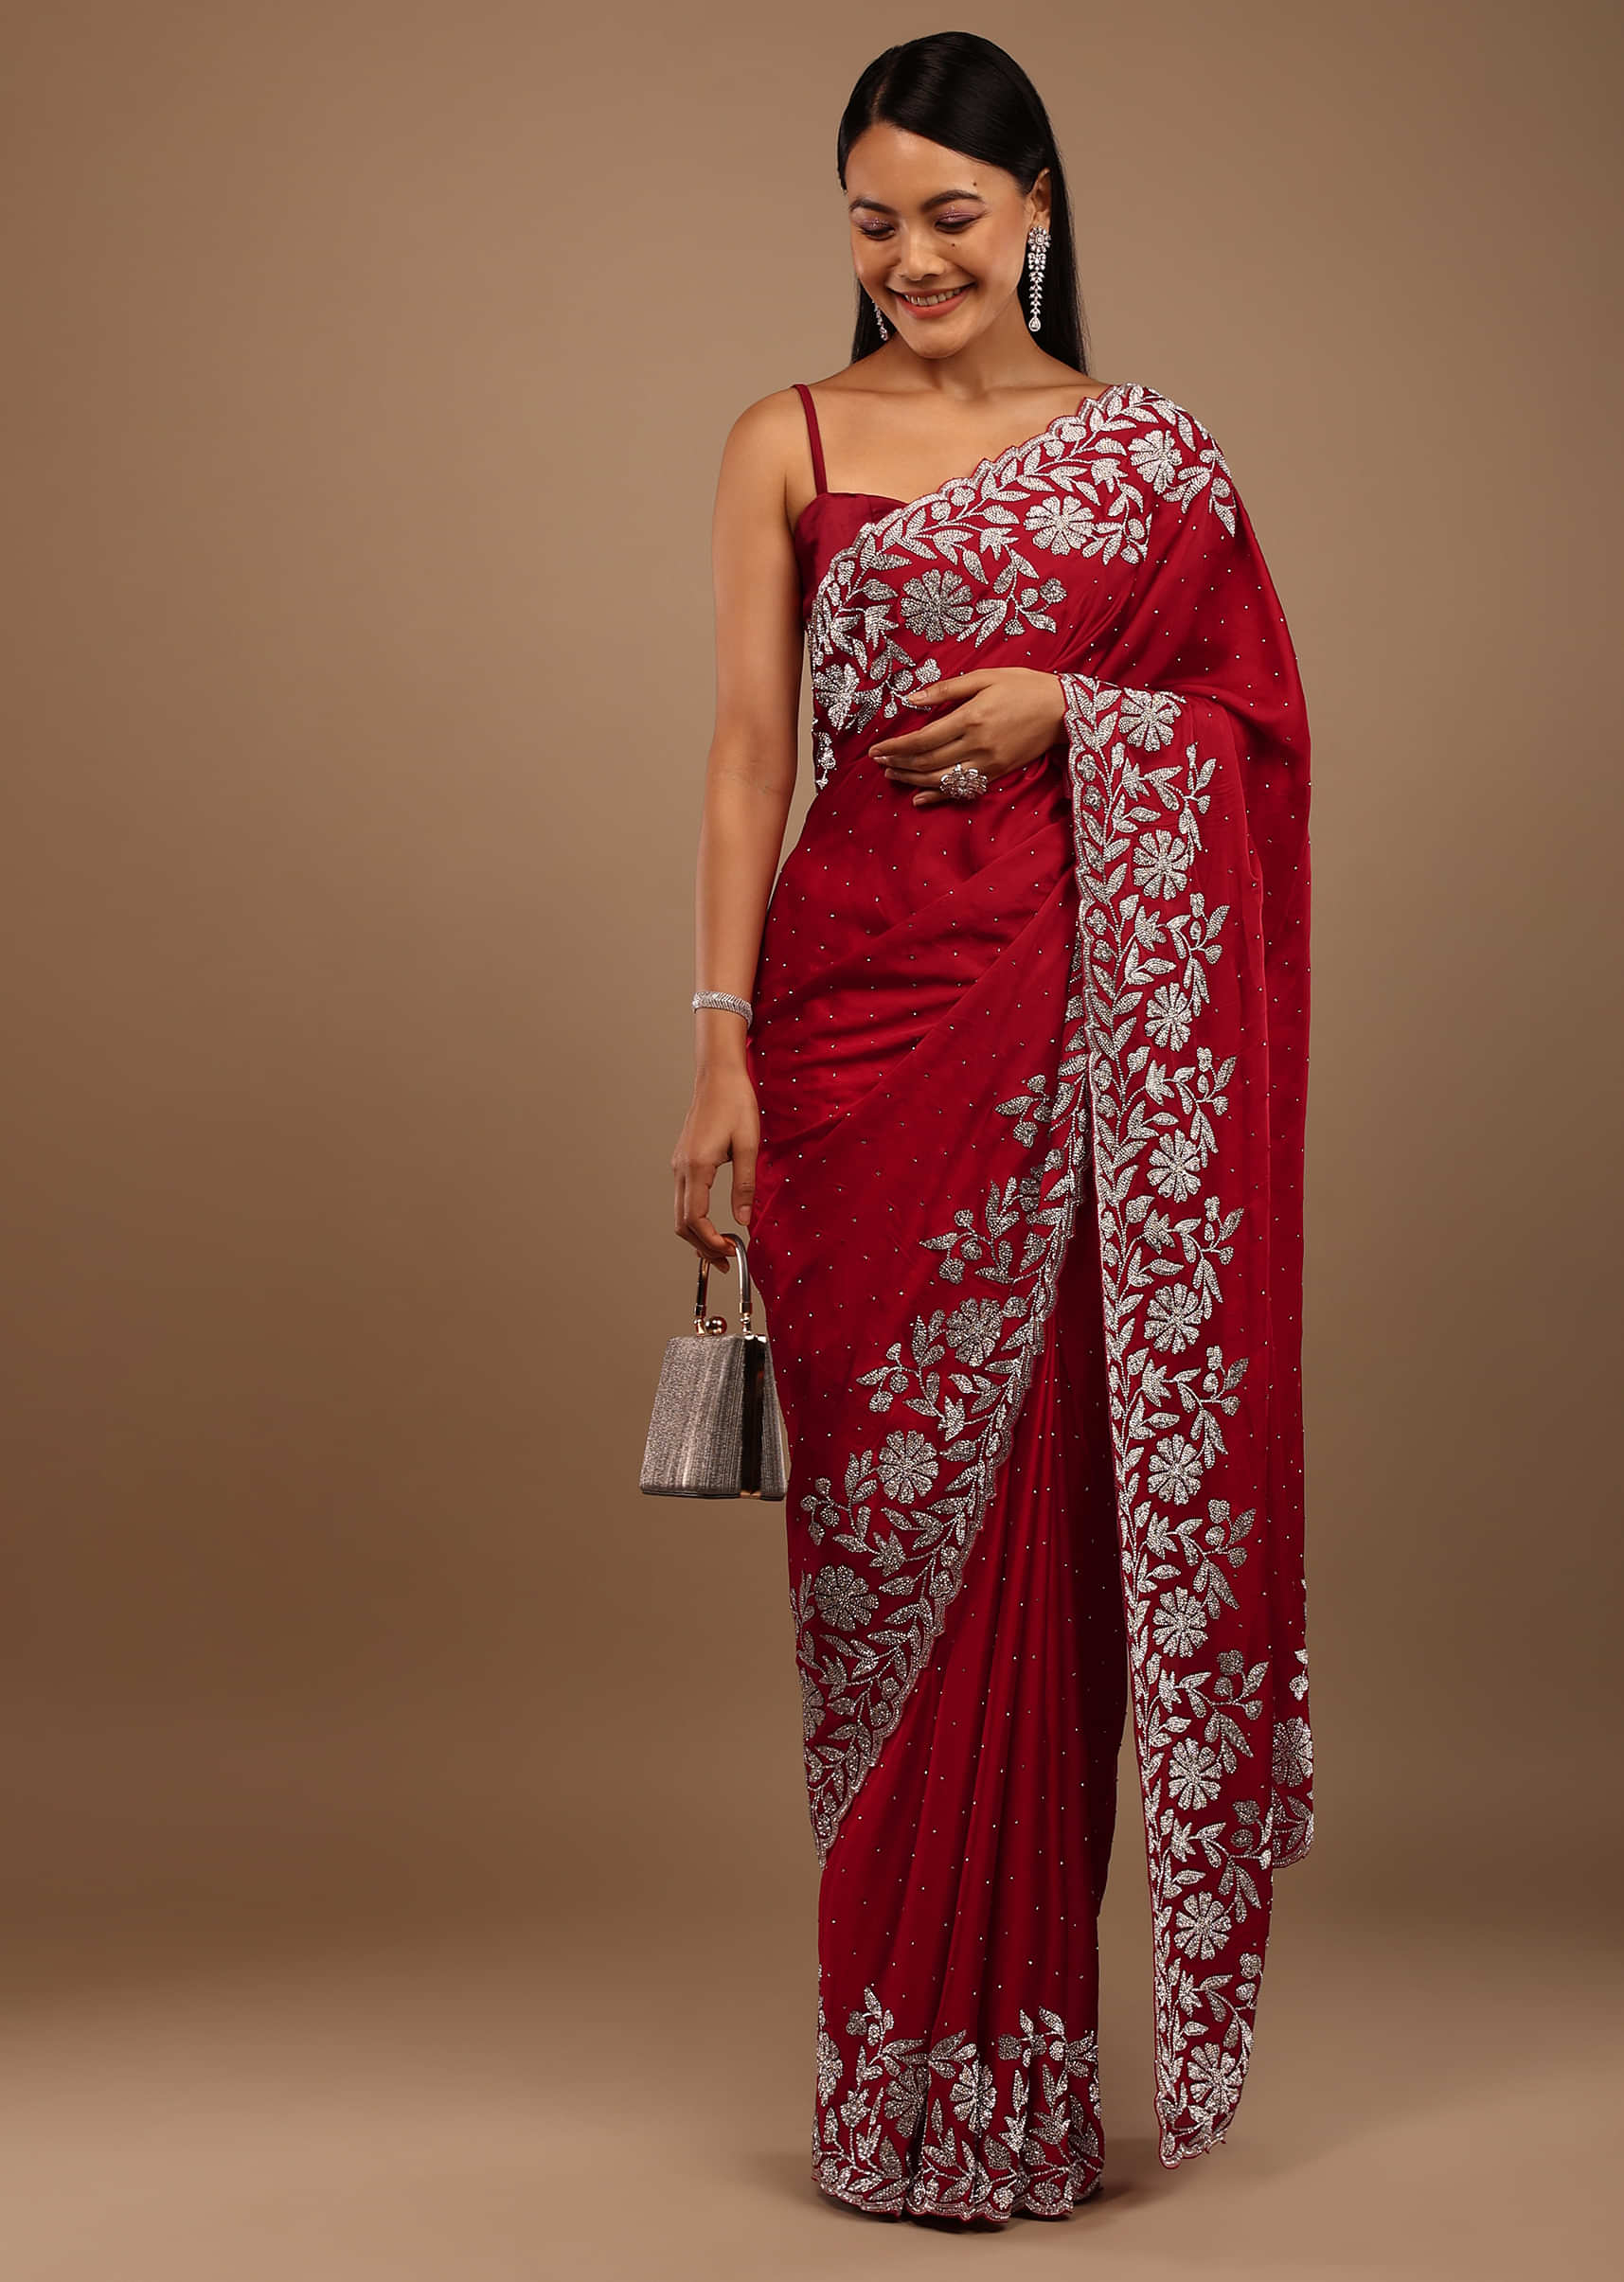 Spicy lollipop Red Satin Saree With Stonework In Floral Pattern